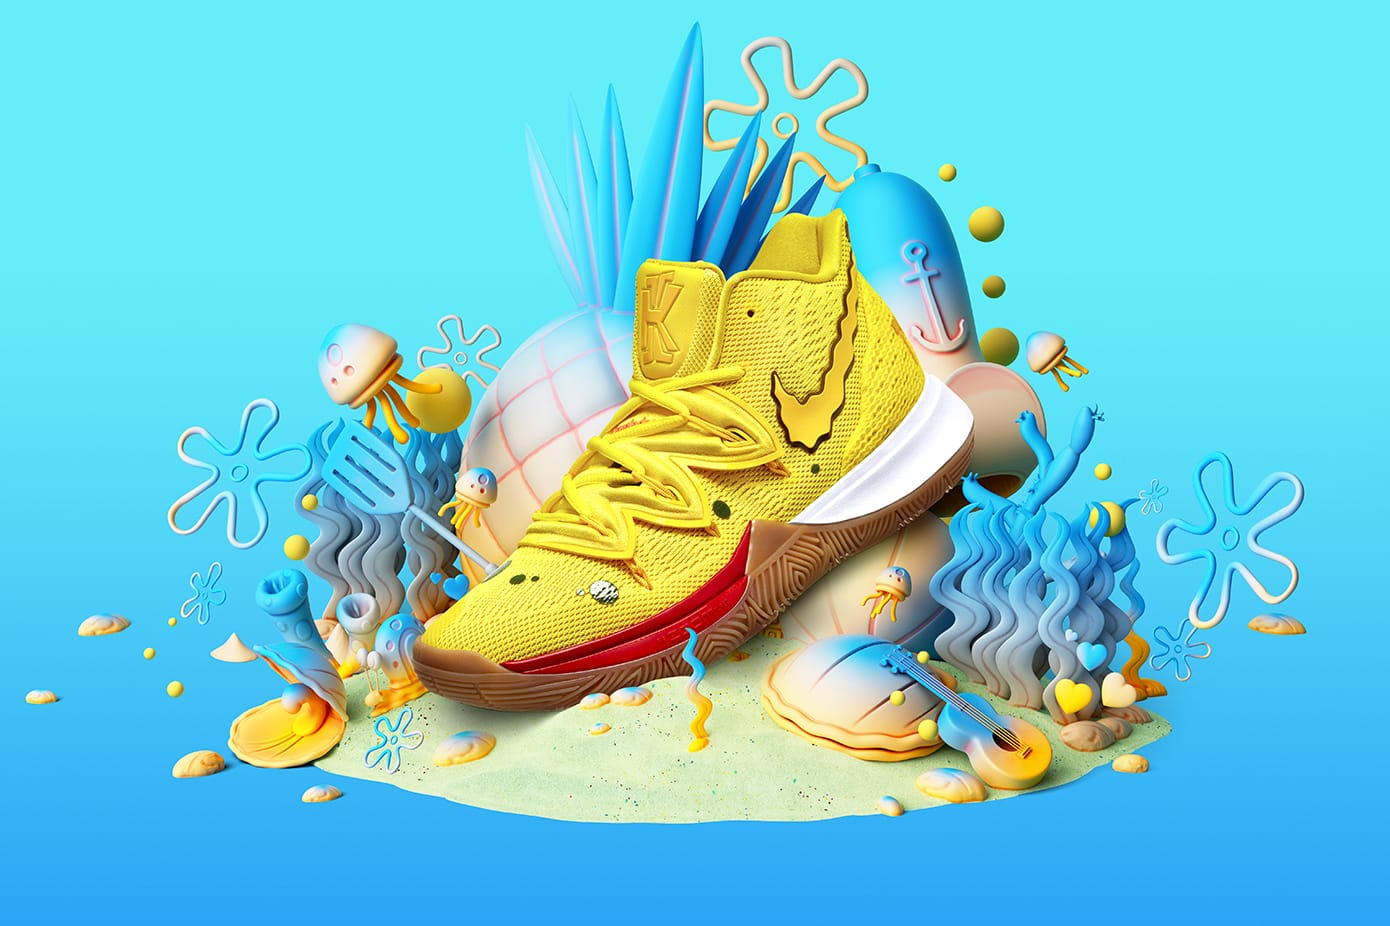 Incredible Pokémon, Anime Sneaker Designs Are Too Good For Nike